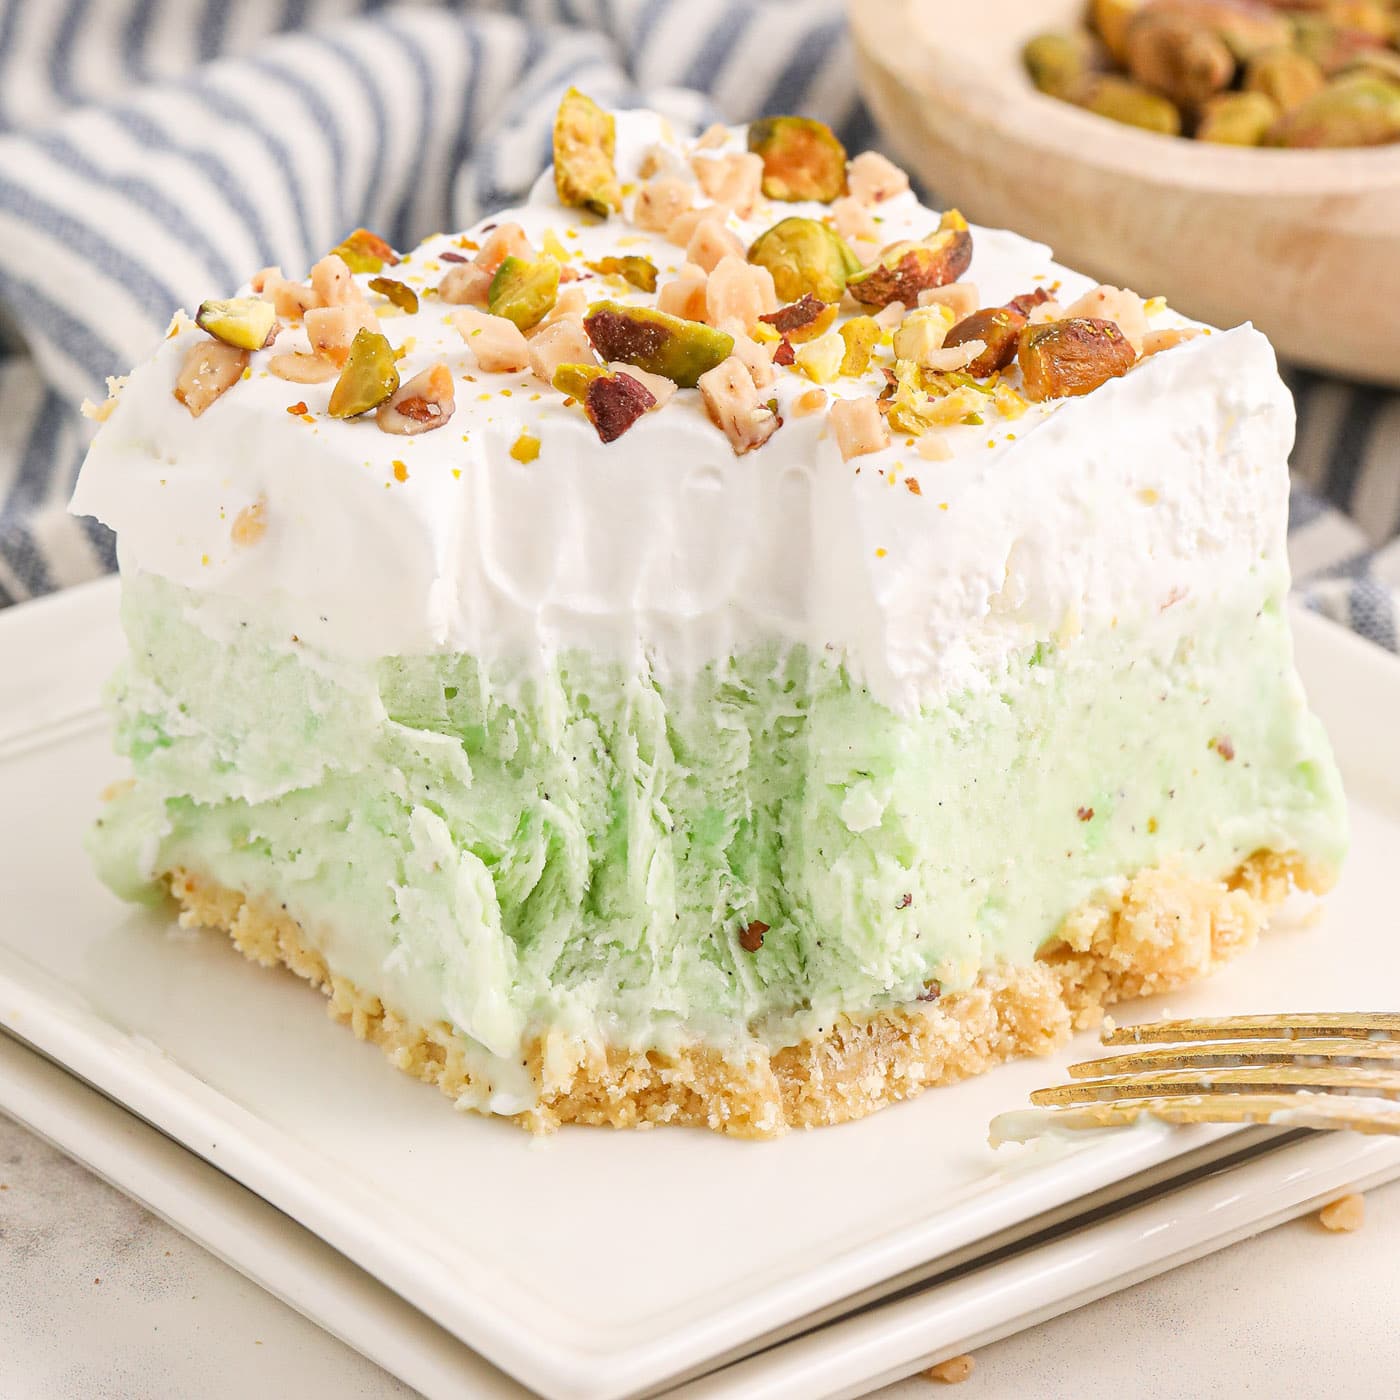 Gluten Free Decadent Pistachio Tres Leches Cake - The Salty Cooker